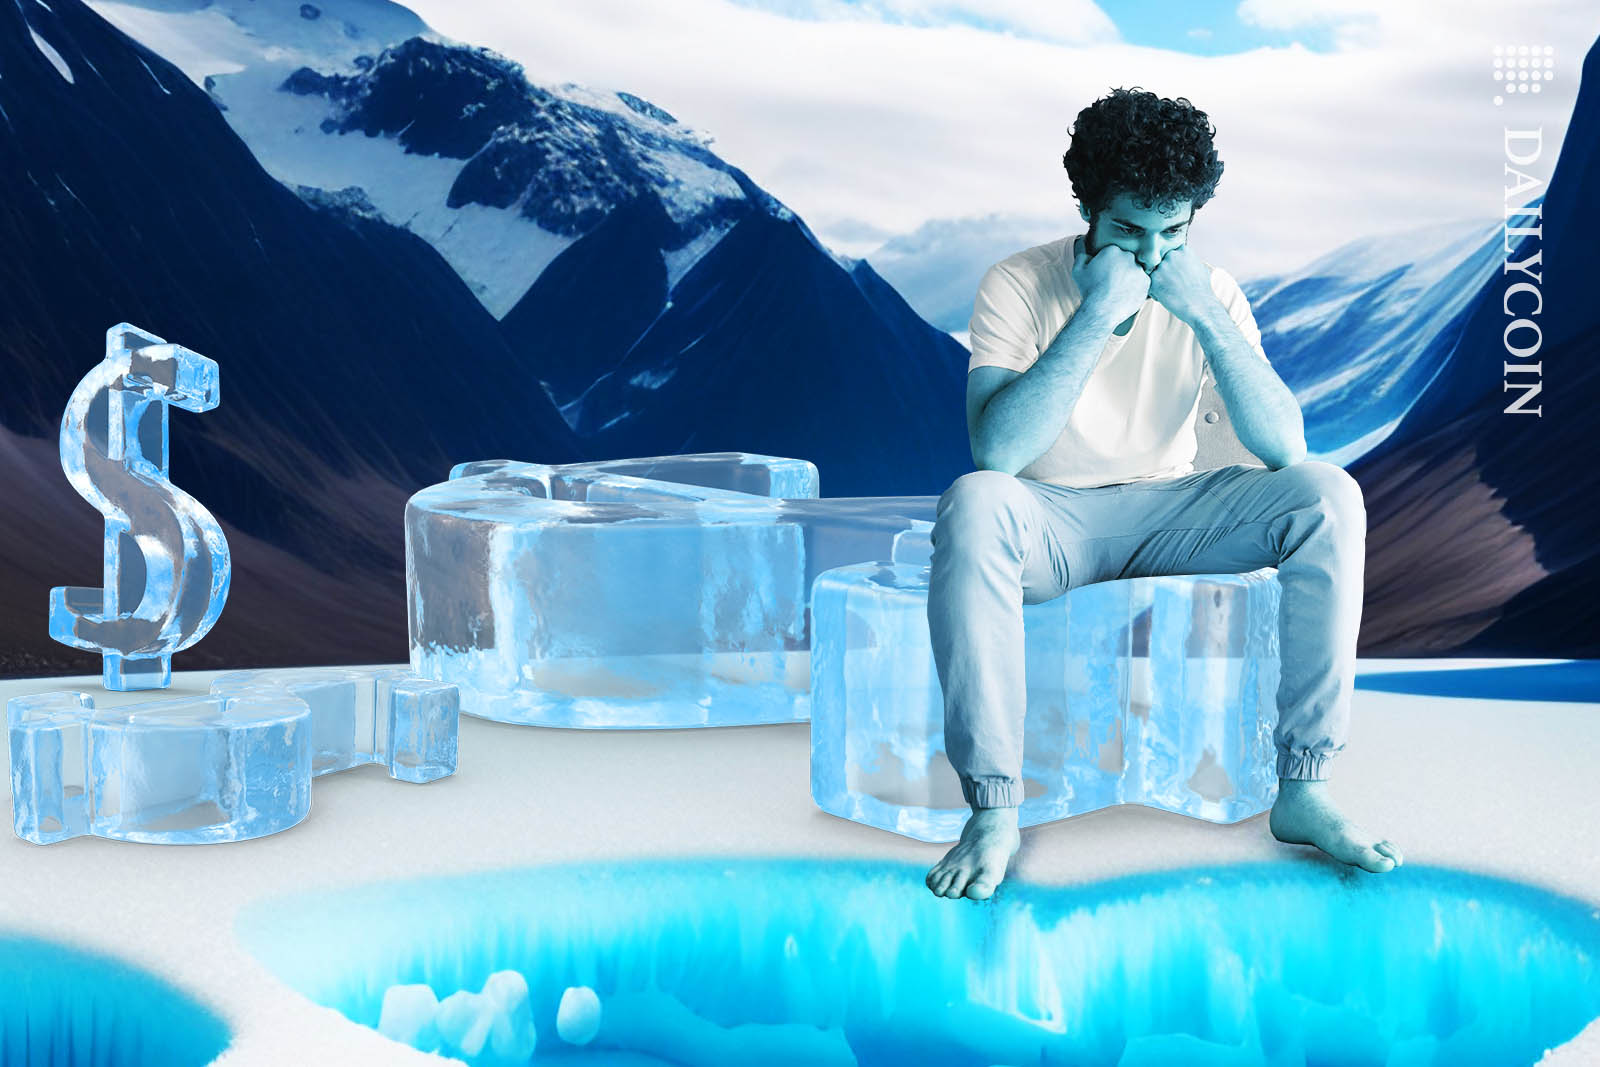 Sad man sitting on frozen dollar signs in an icey mountainous environment.